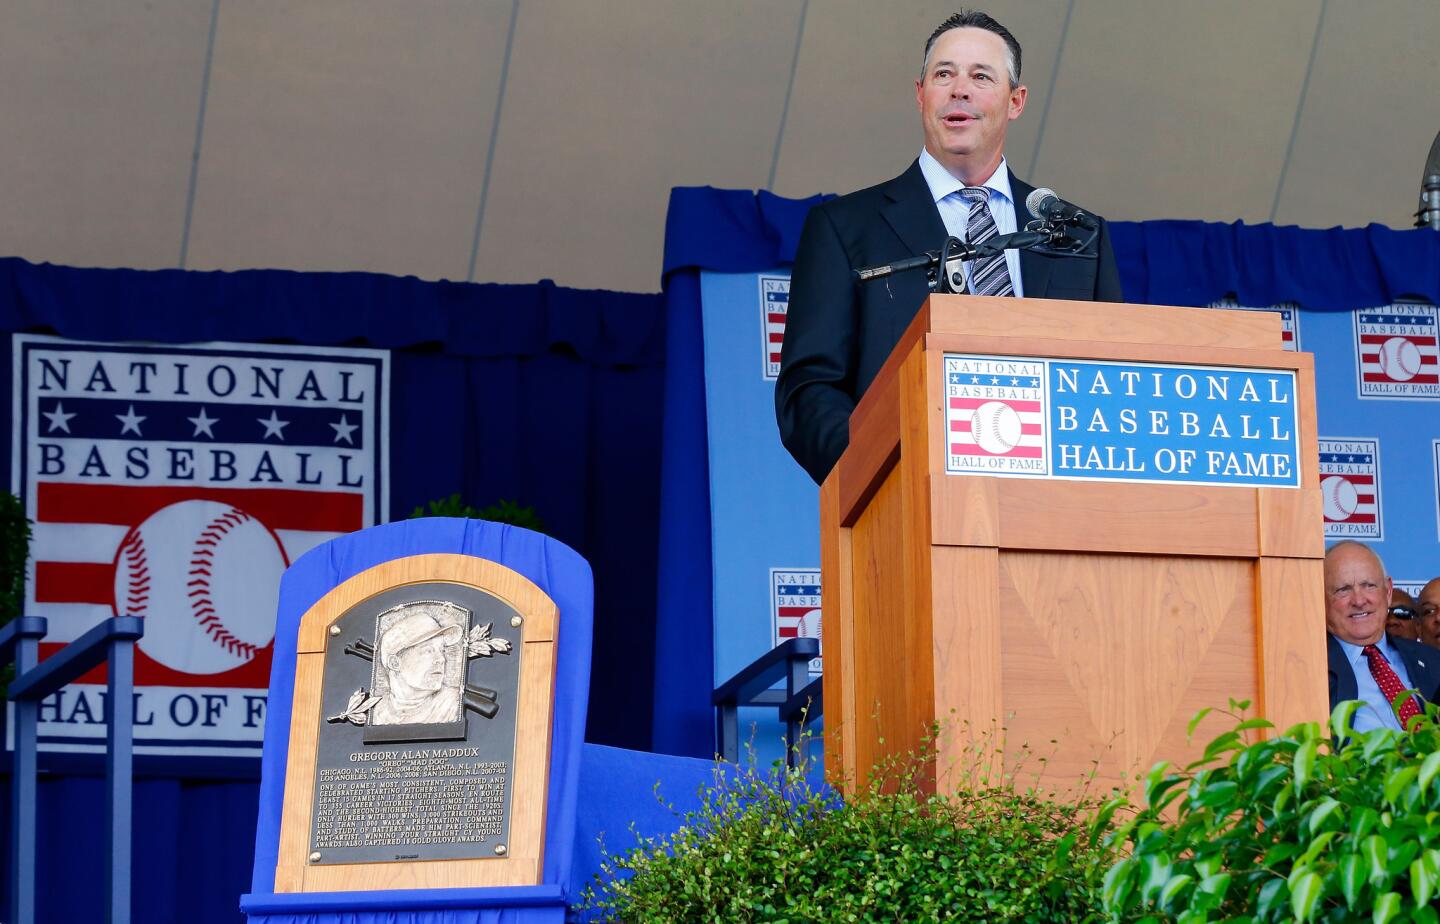 Not in Hall of Fame - 4. Greg Maddux